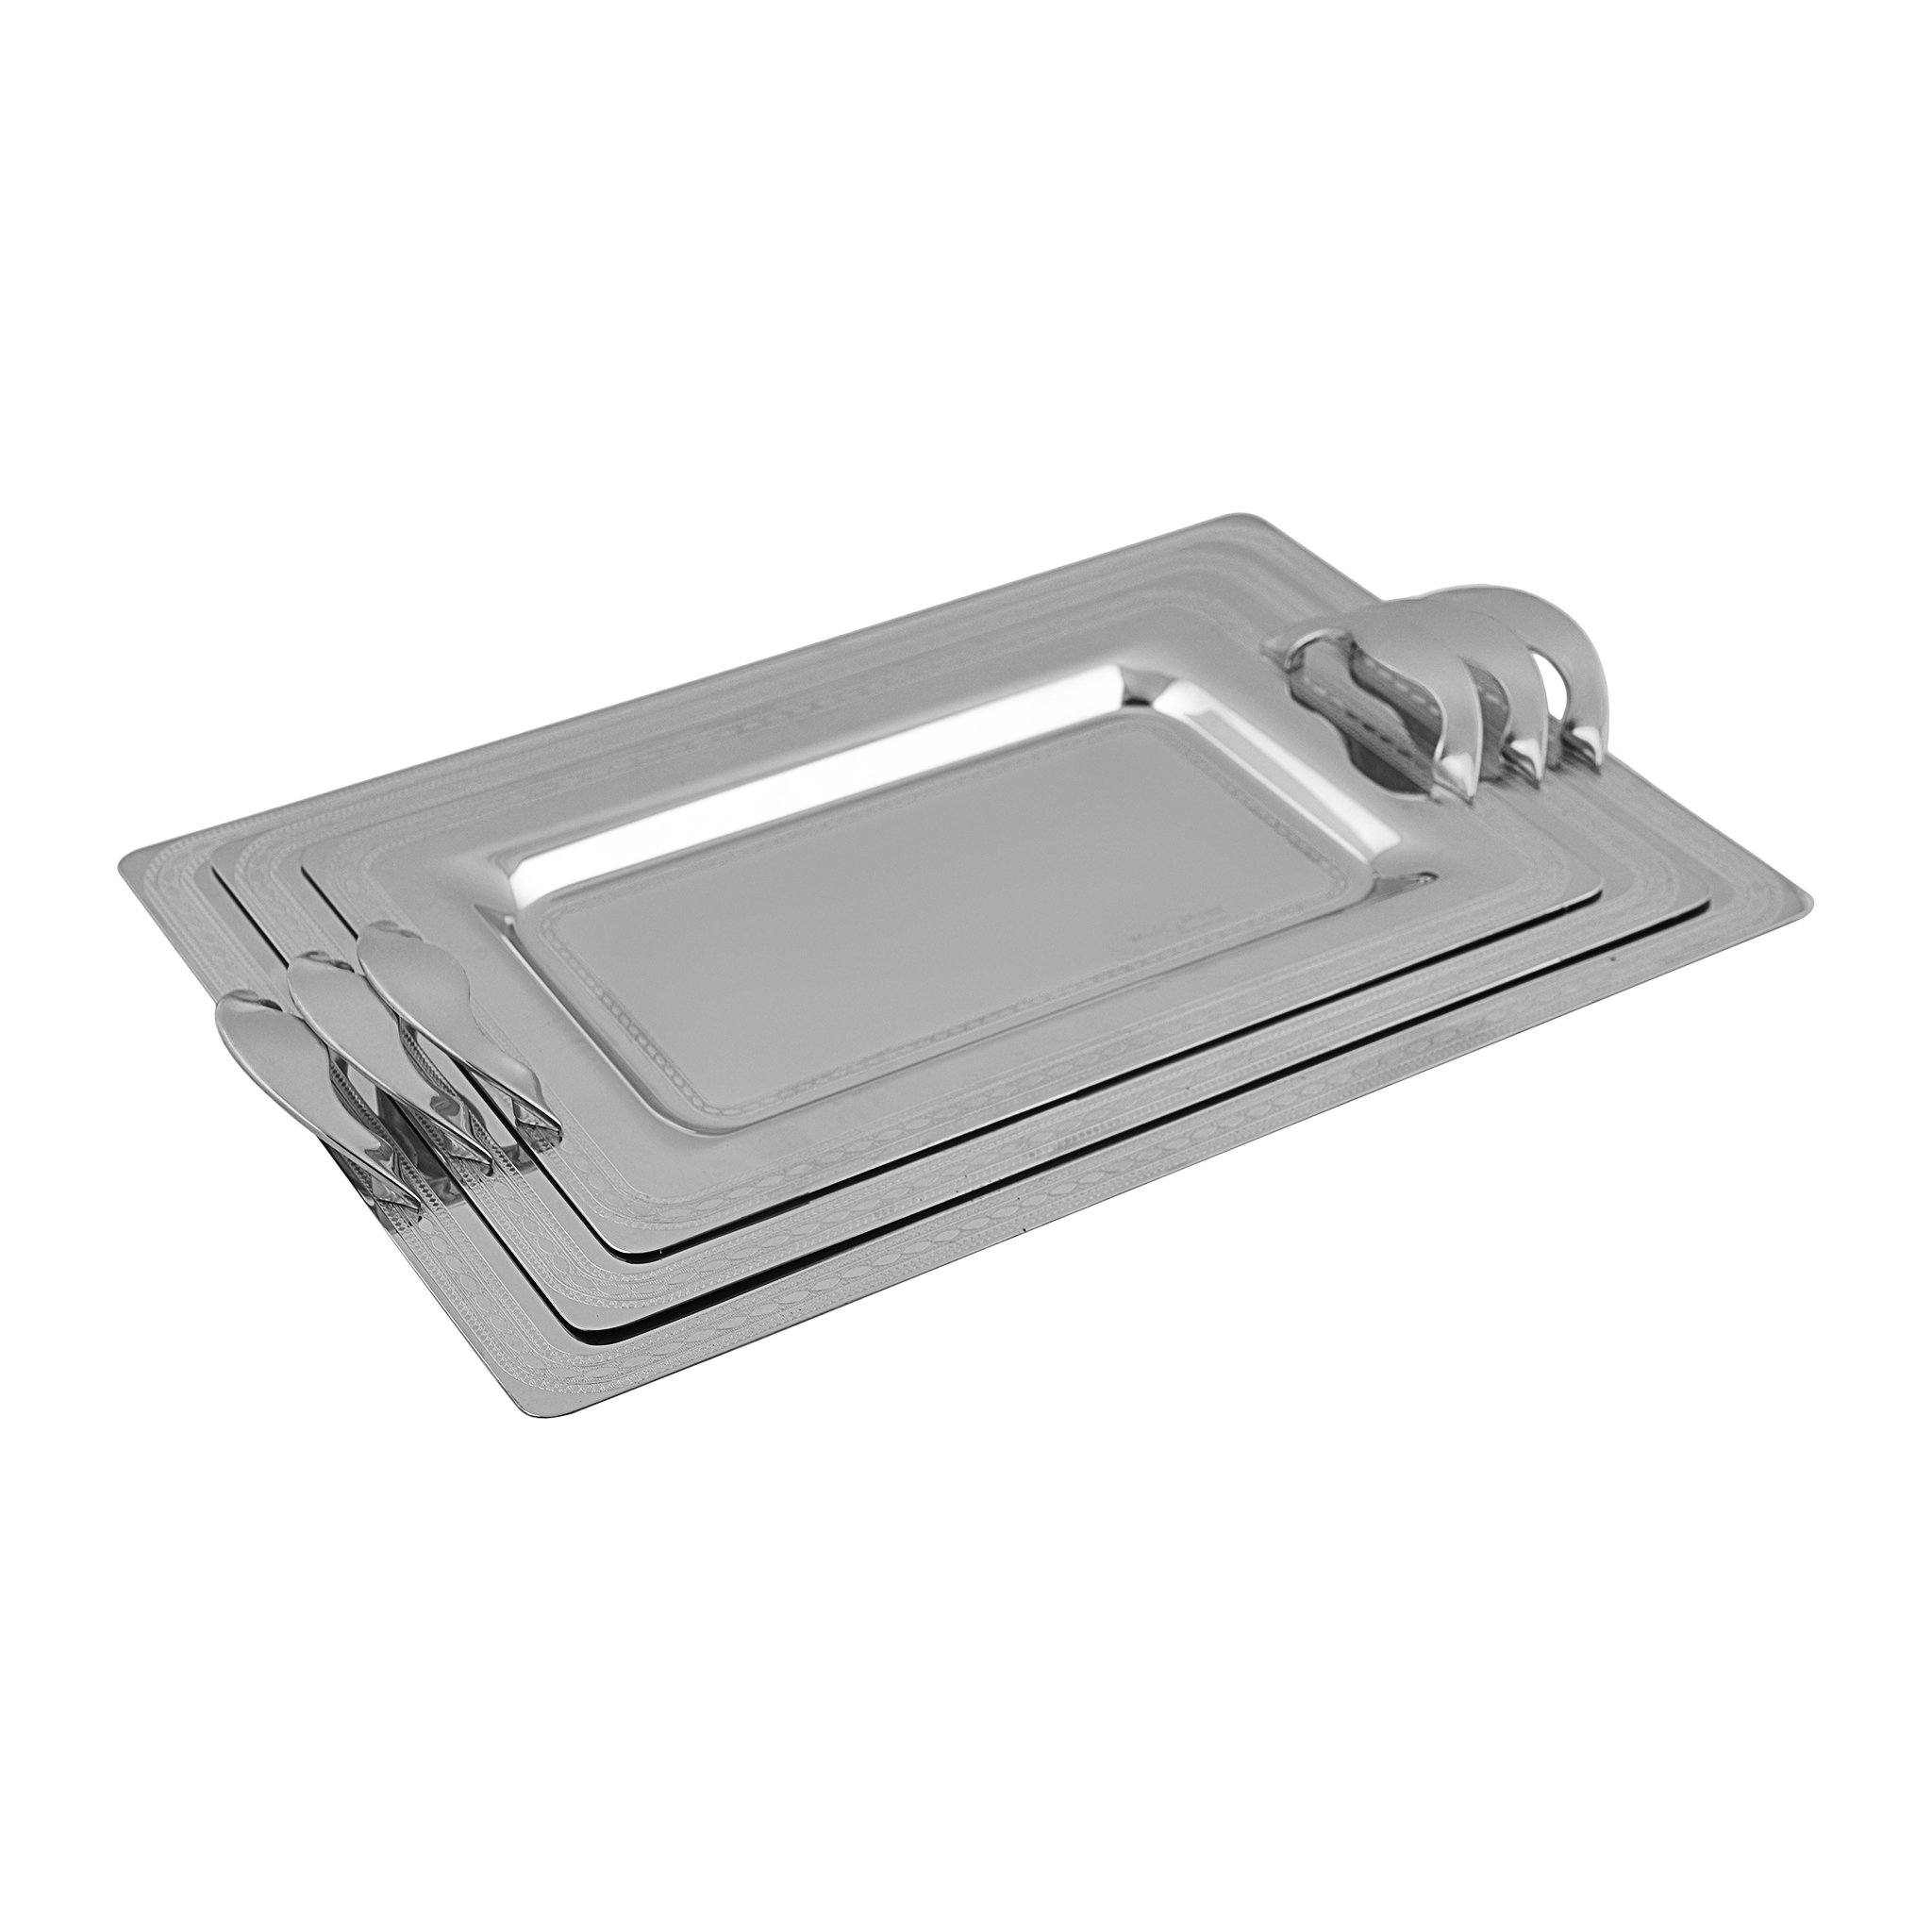 Elegant Gioiel - Rectangular Tray Set with Handles 3 Pieces - Stainless Steel 18/10 - 75000259